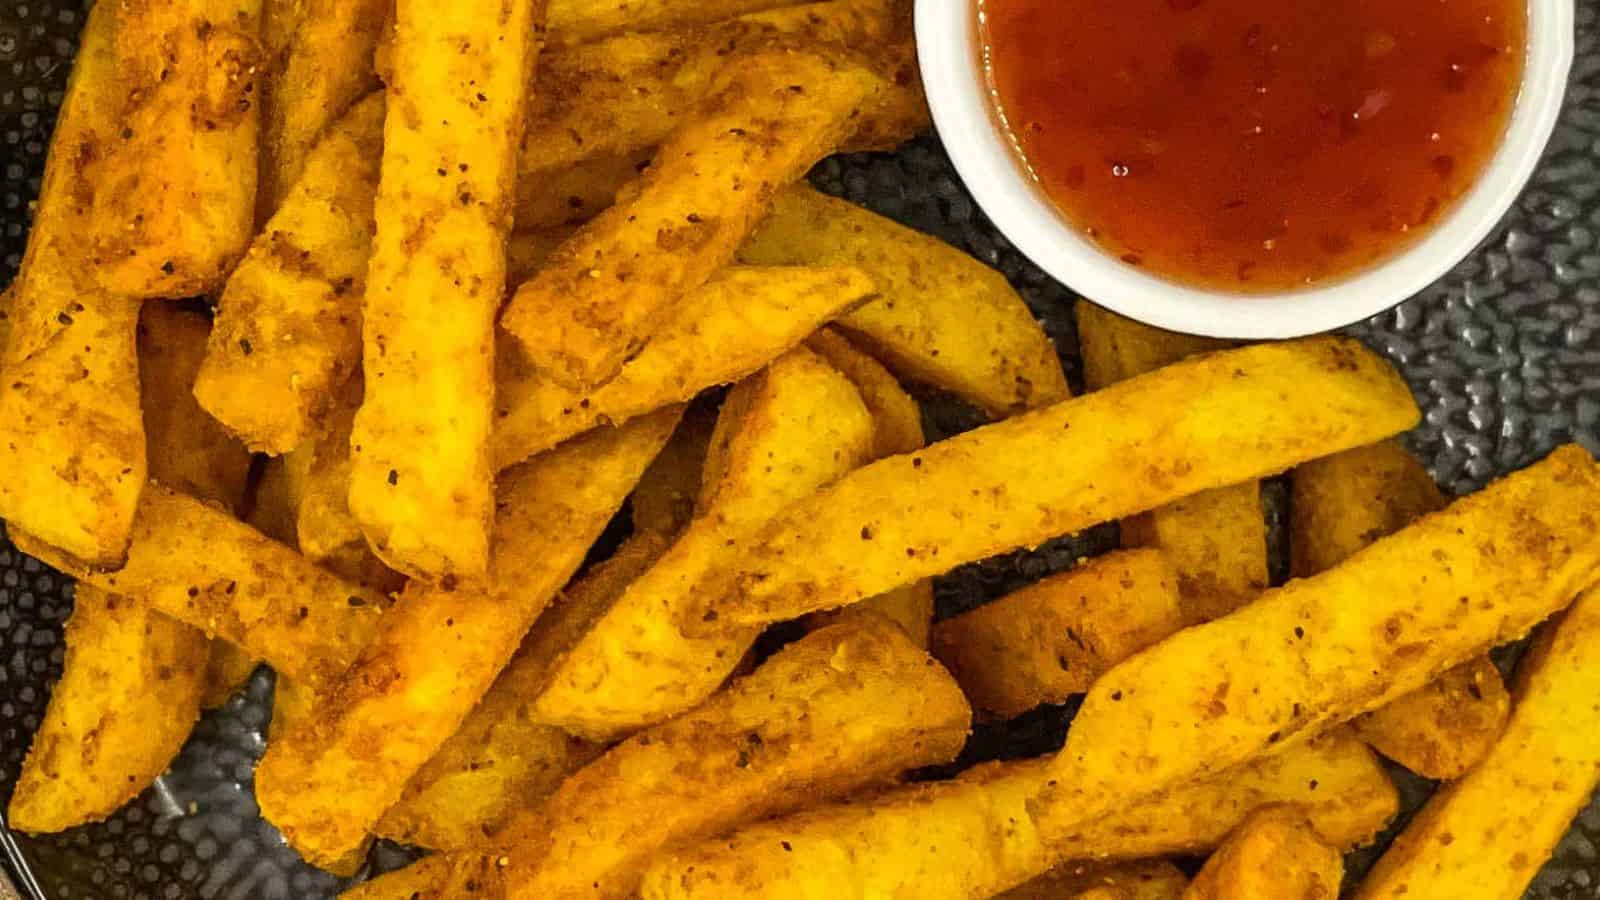 Masala fries on a plate with sweet chili sauce.